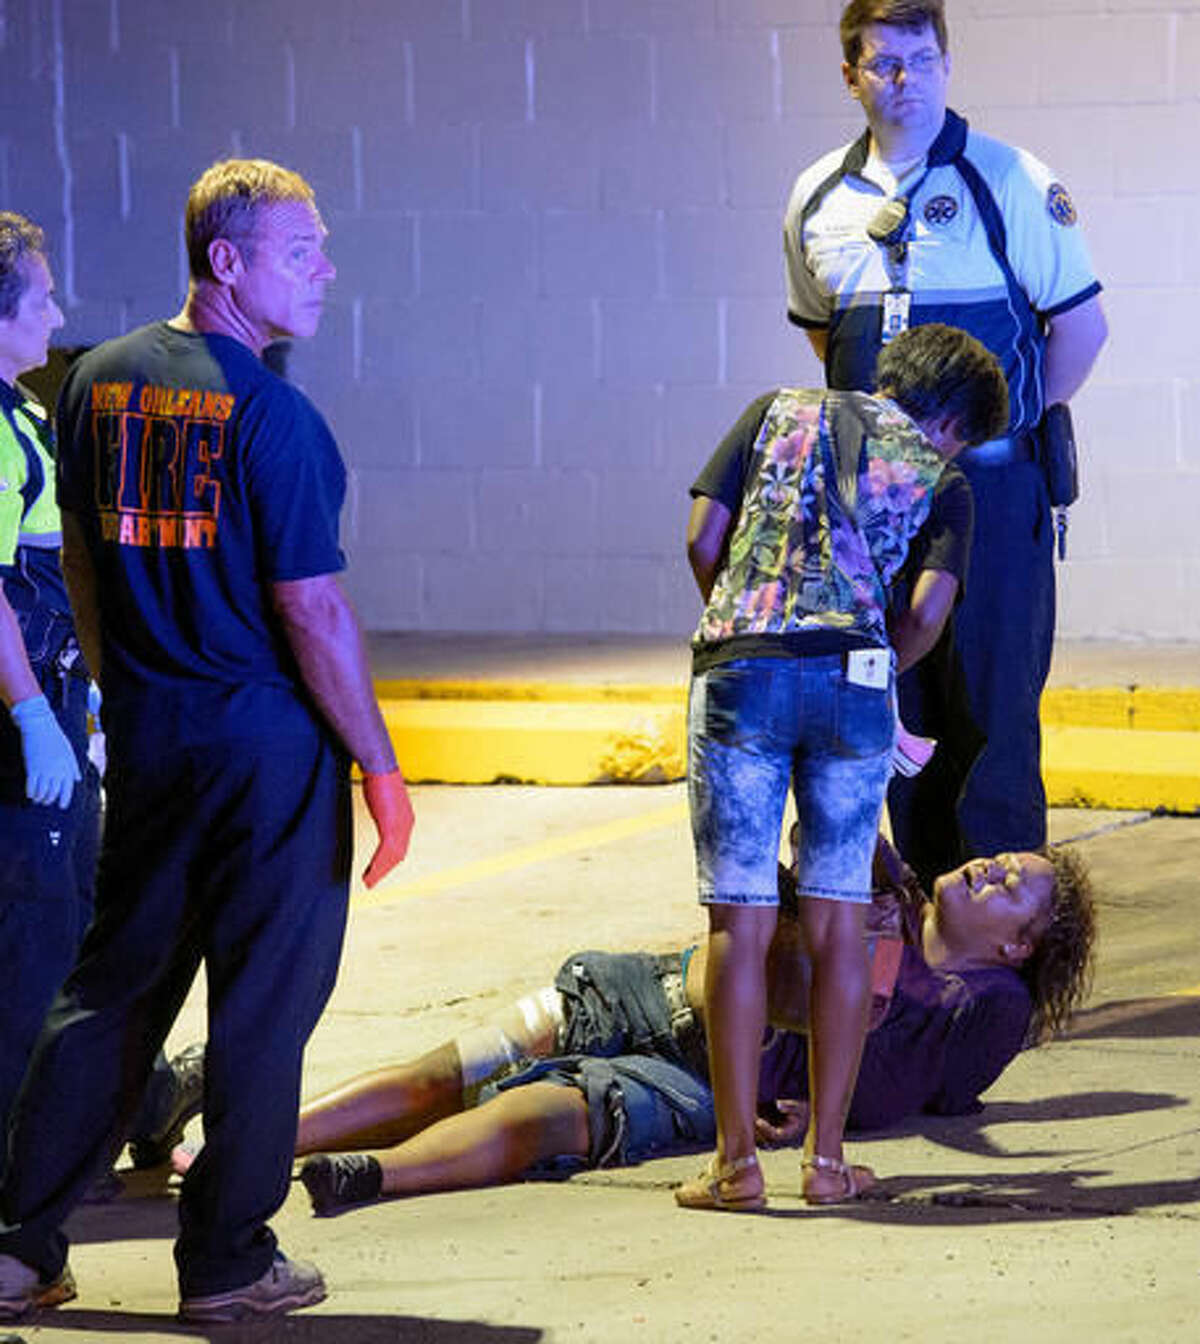 New Orleans Police Department, Fire Department, and EMS personnel respond to an injured woman at the scene of shooting where multiple people were shot, near First and South Derbigny St. in New Orleans, La. Sunday, Sept. 11, 2016. NOPD said they were working a triple shooting in the area. The woman was transported from the scene via ambulance. (Matthew Hinton/The Advocate via AP)